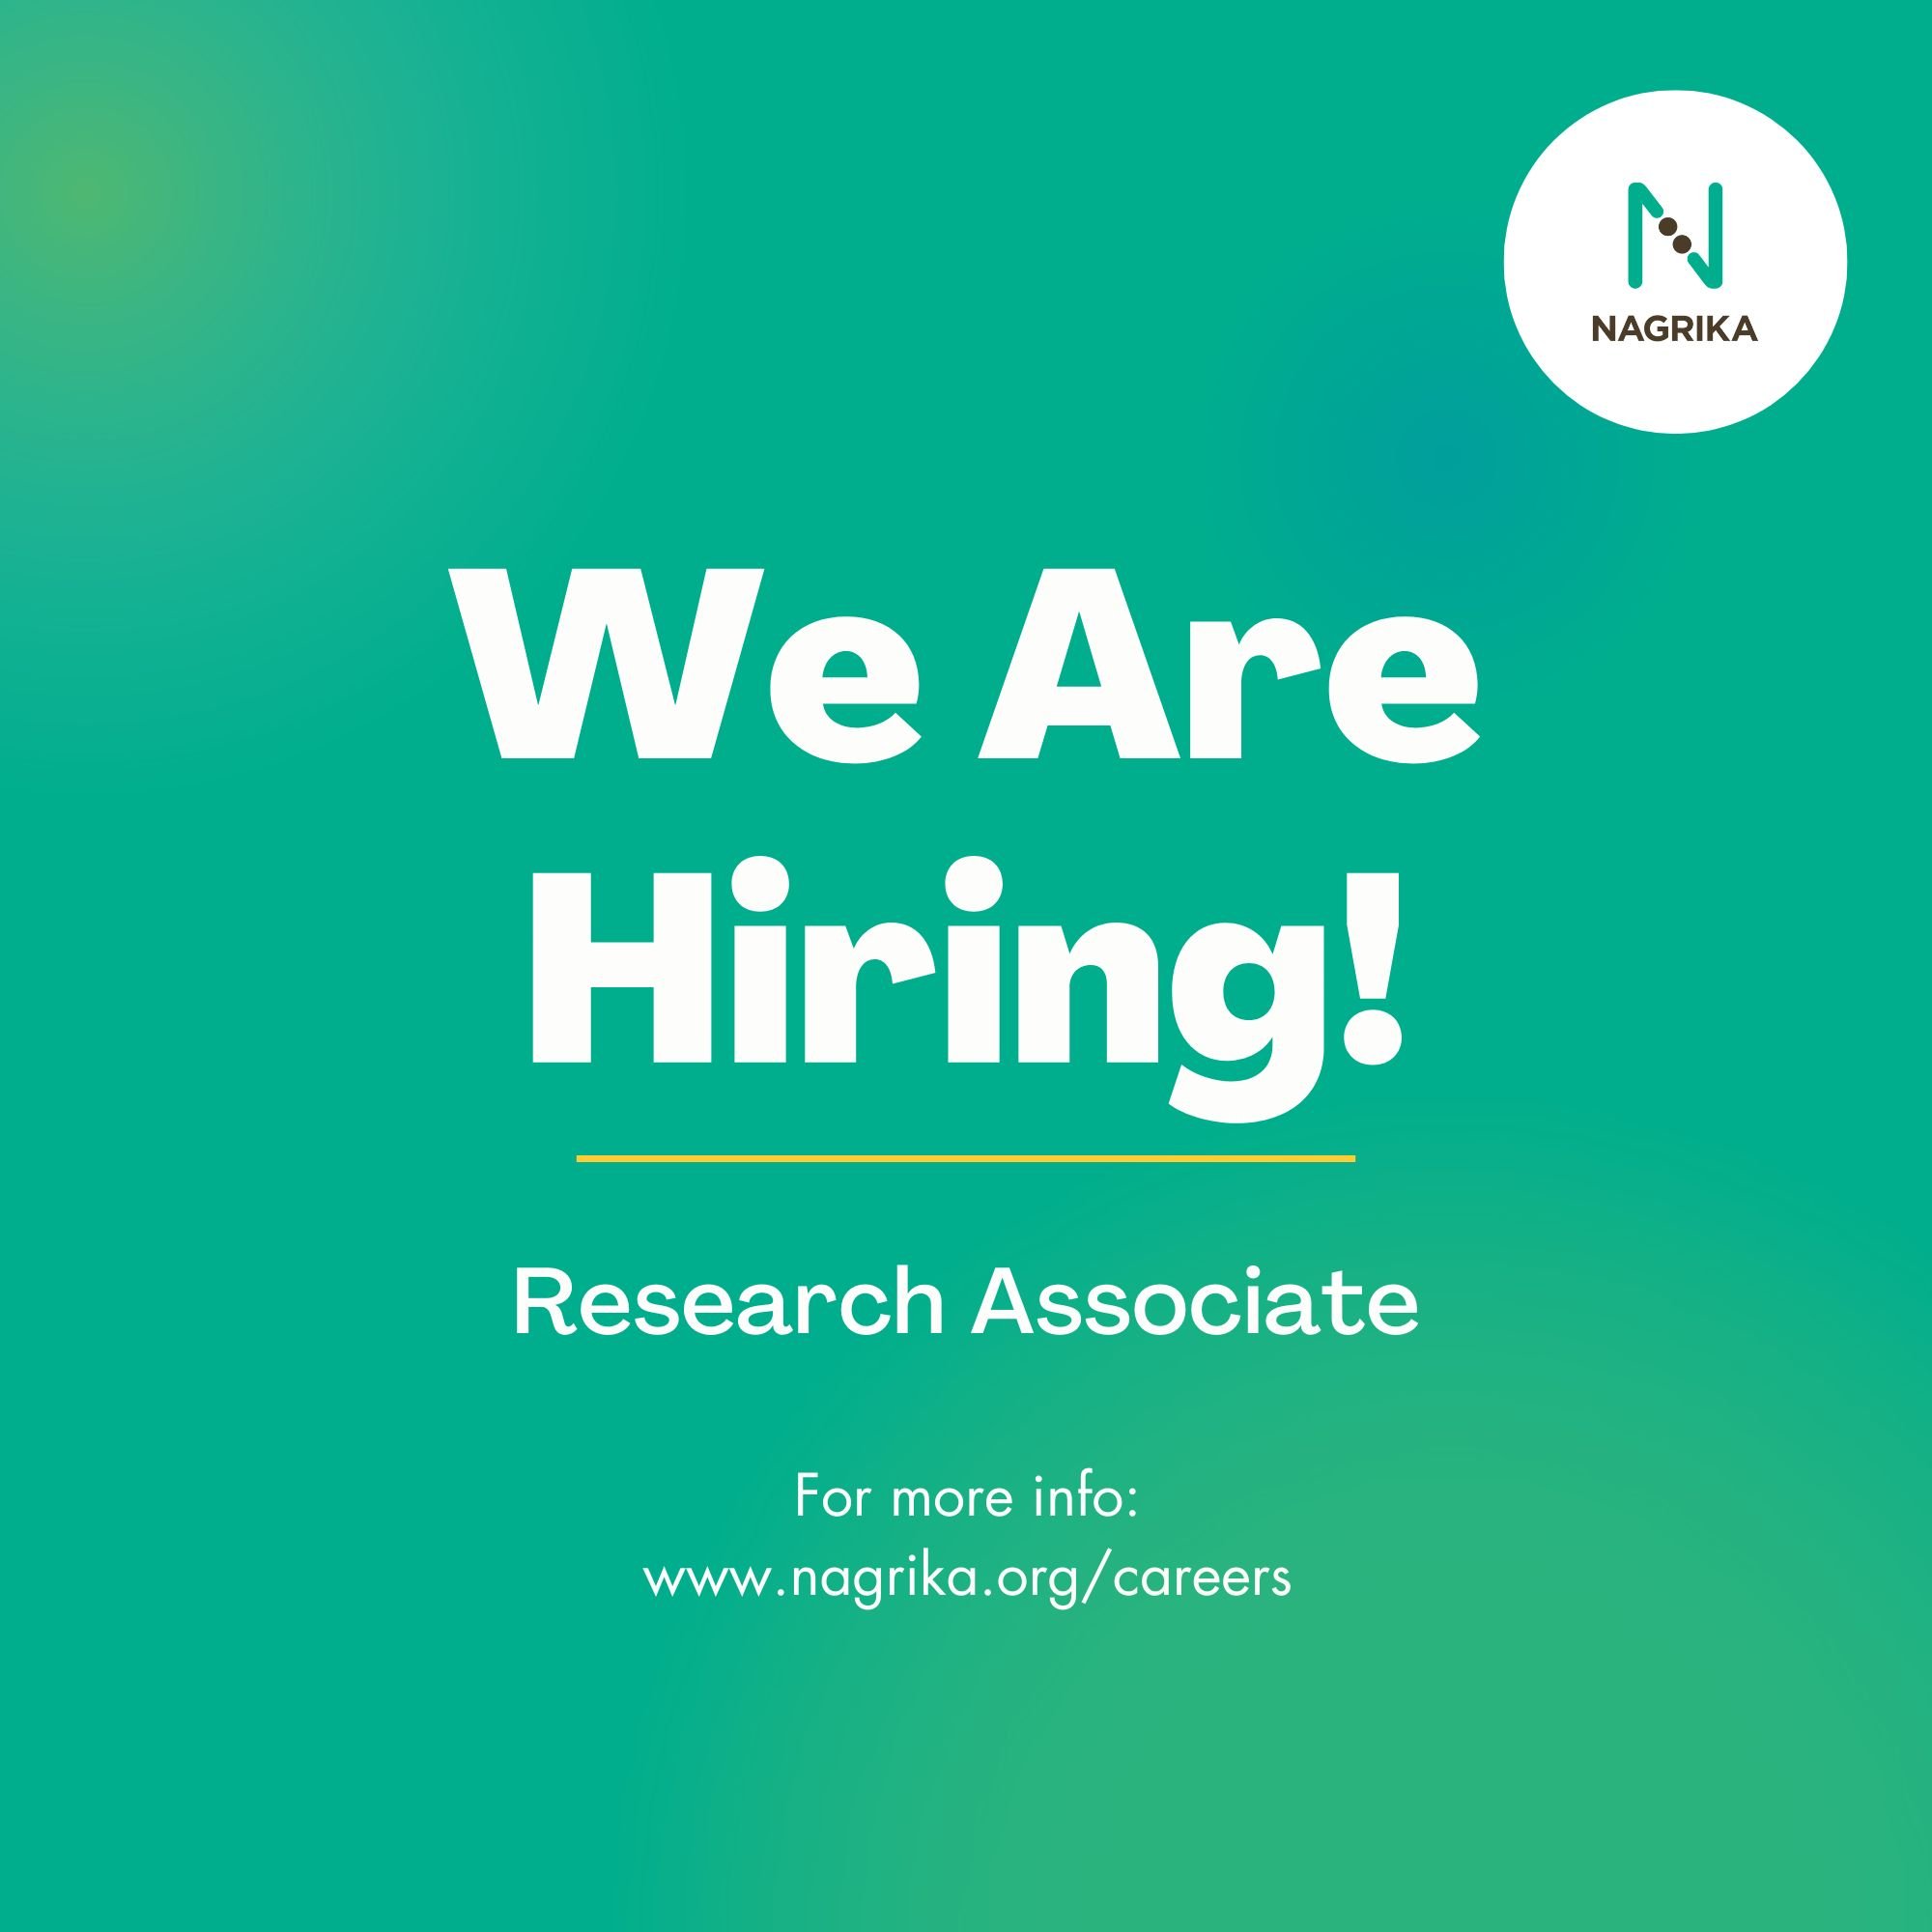 We are seeking enthusiastic individuals to join our team in research roles. The ideal candidate would demonstrate a proactive approach, initiative, and commitment. 

The research associate position is perfect for someone who wants hands-on experience